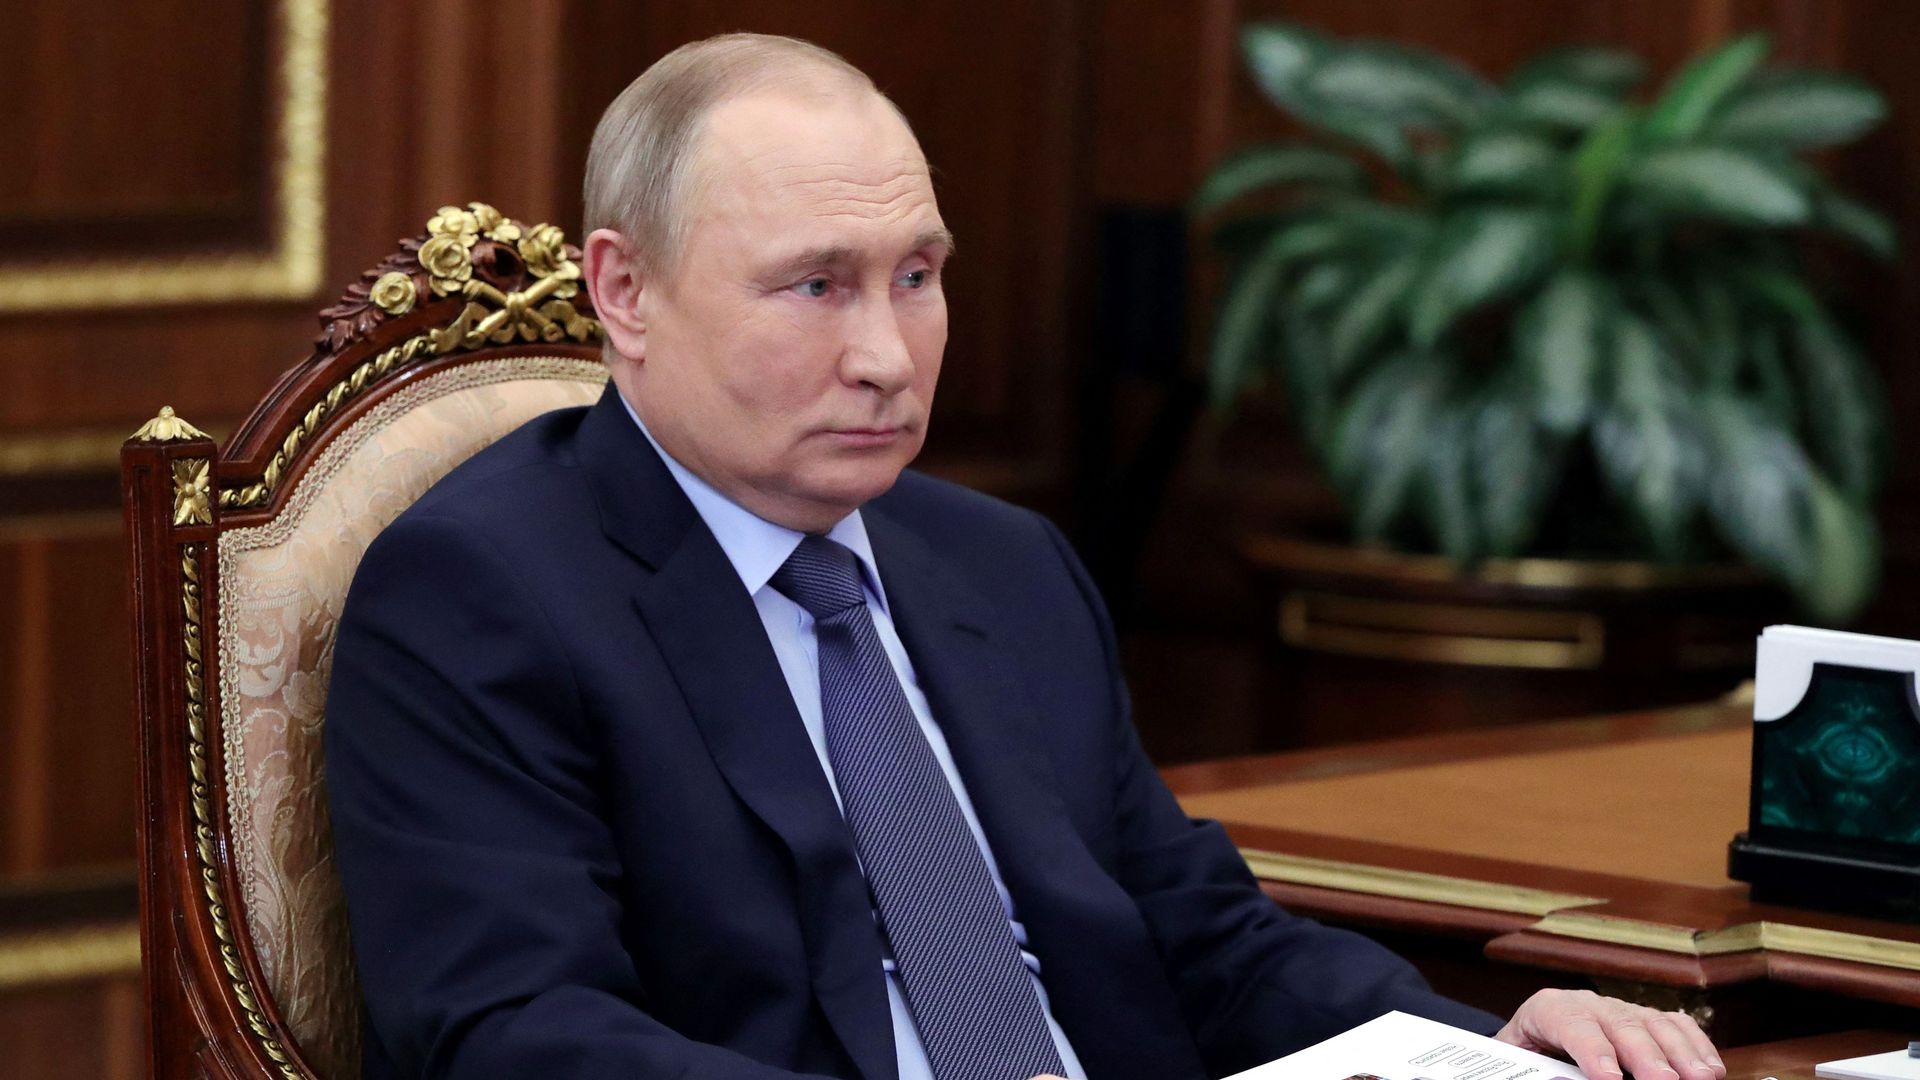 Russia's President Vladimir Putin listens during a meeting  in Moscow's Kremlin on May 5.